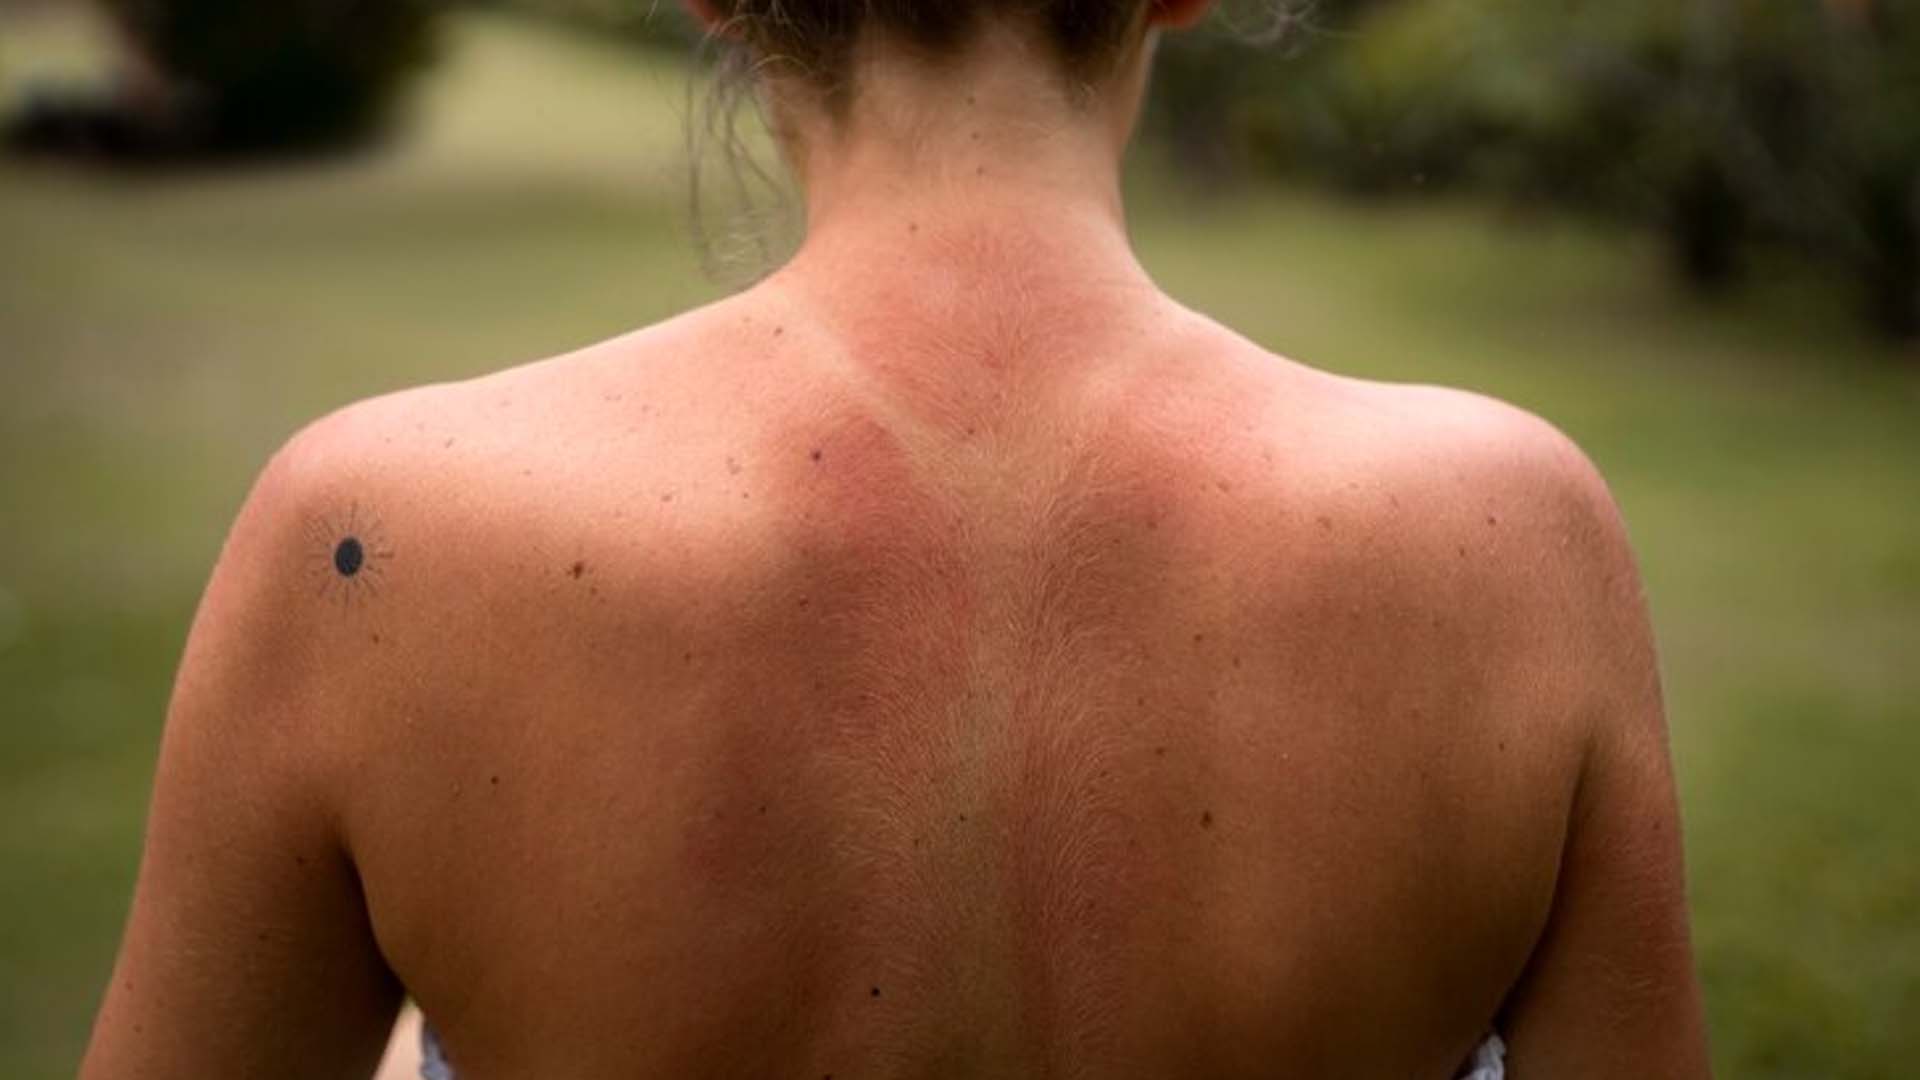 What are the Home Remedies for Heat Rash?